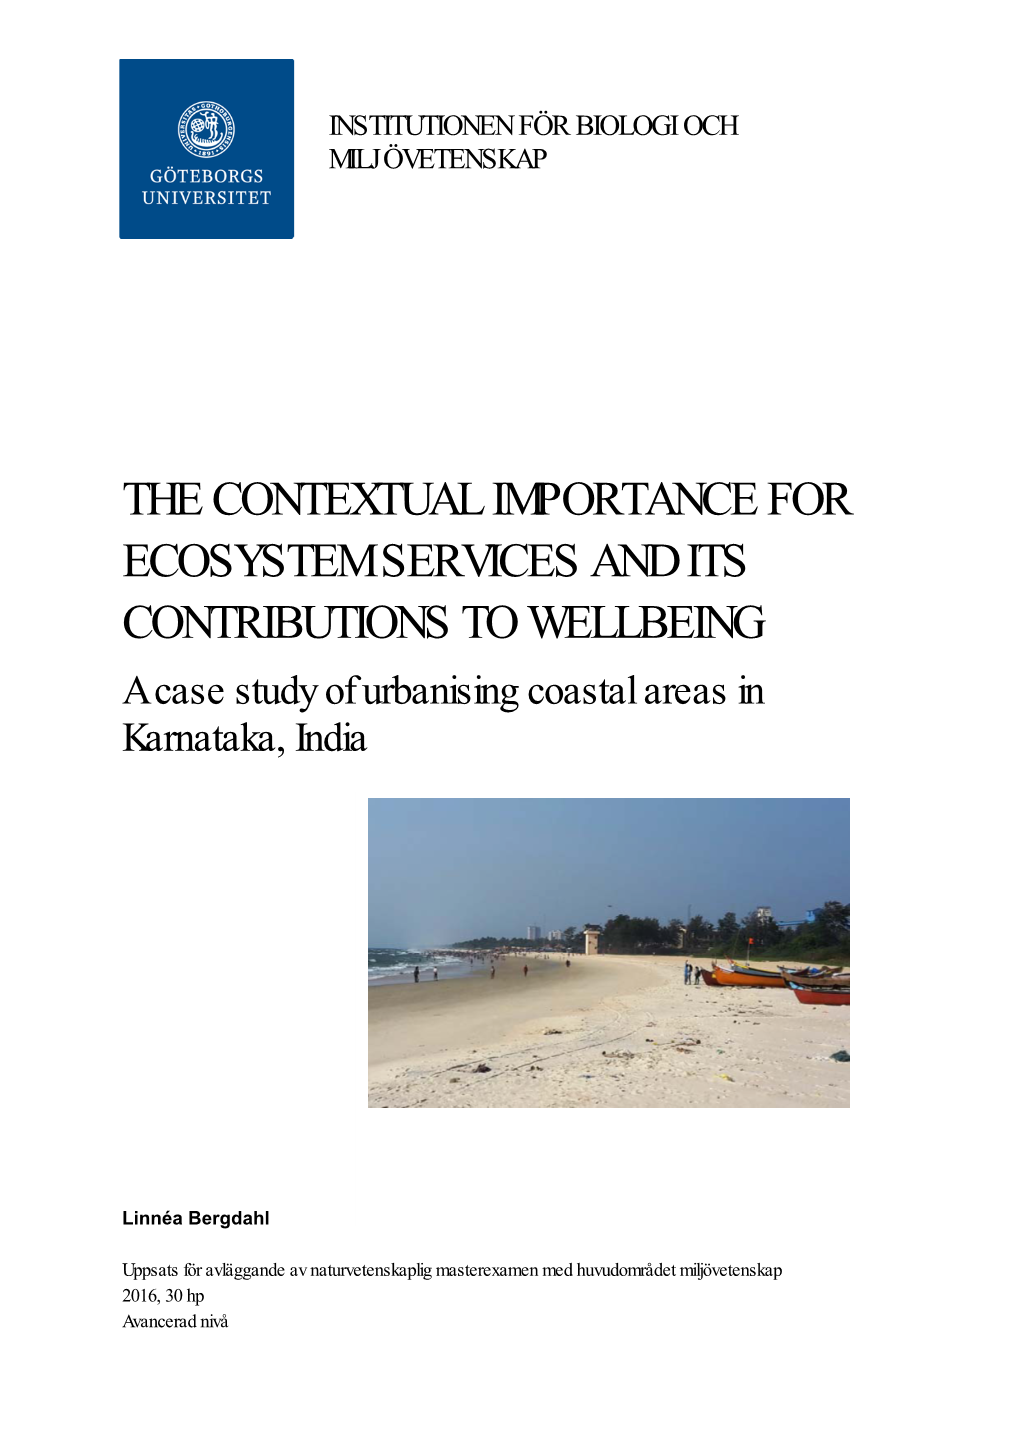 THE CONTEXTUAL IMPORTANCE for ECOSYSTEM SERVICES and ITS CONTRIBUTIONS to WELLBEING a Case Study of Urbanising Coastal Areas in Karnataka, India